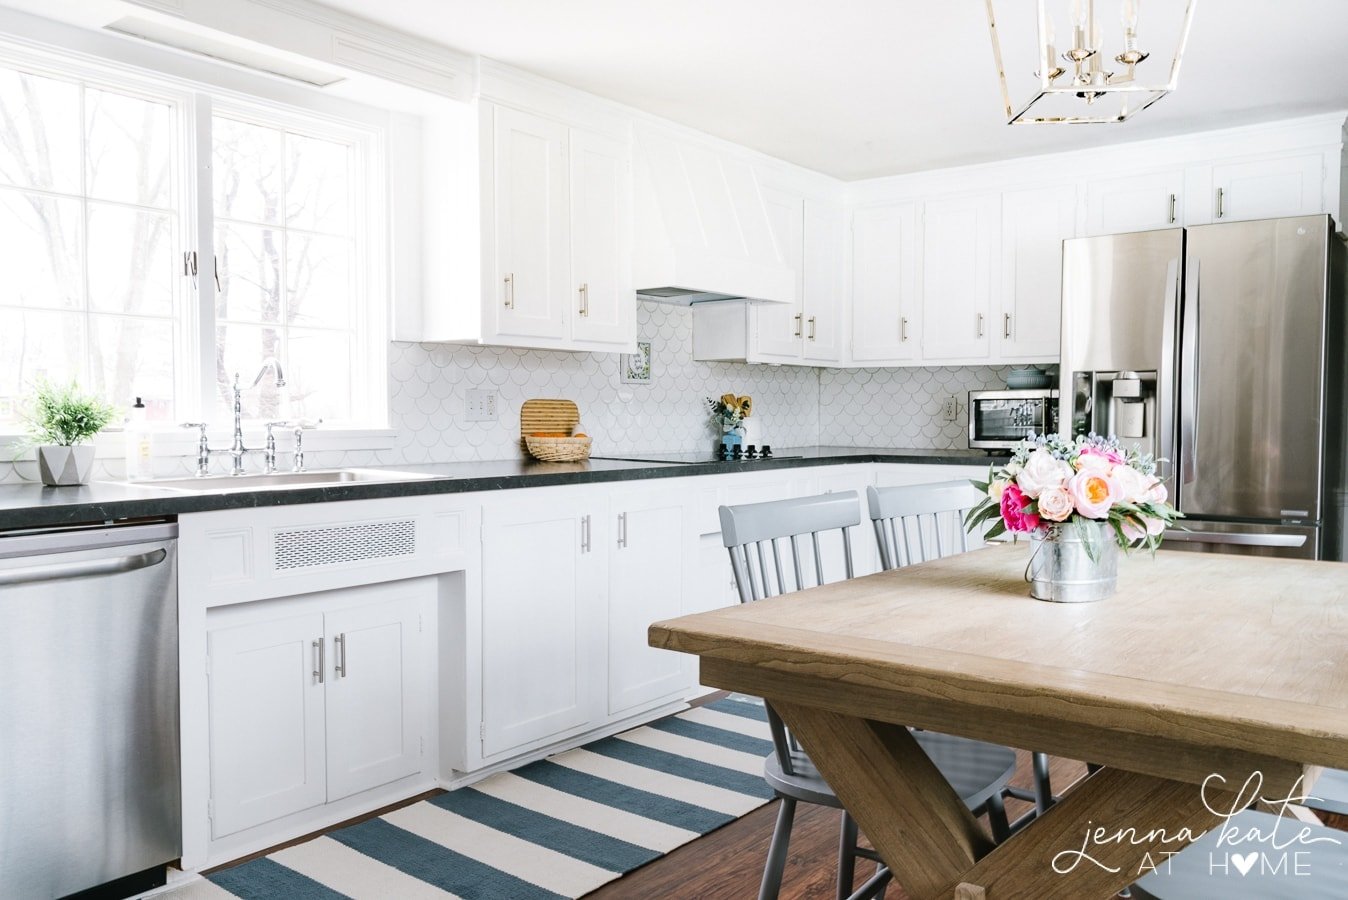 Kitchen Makeover Reveal   Jenna Kate at Home